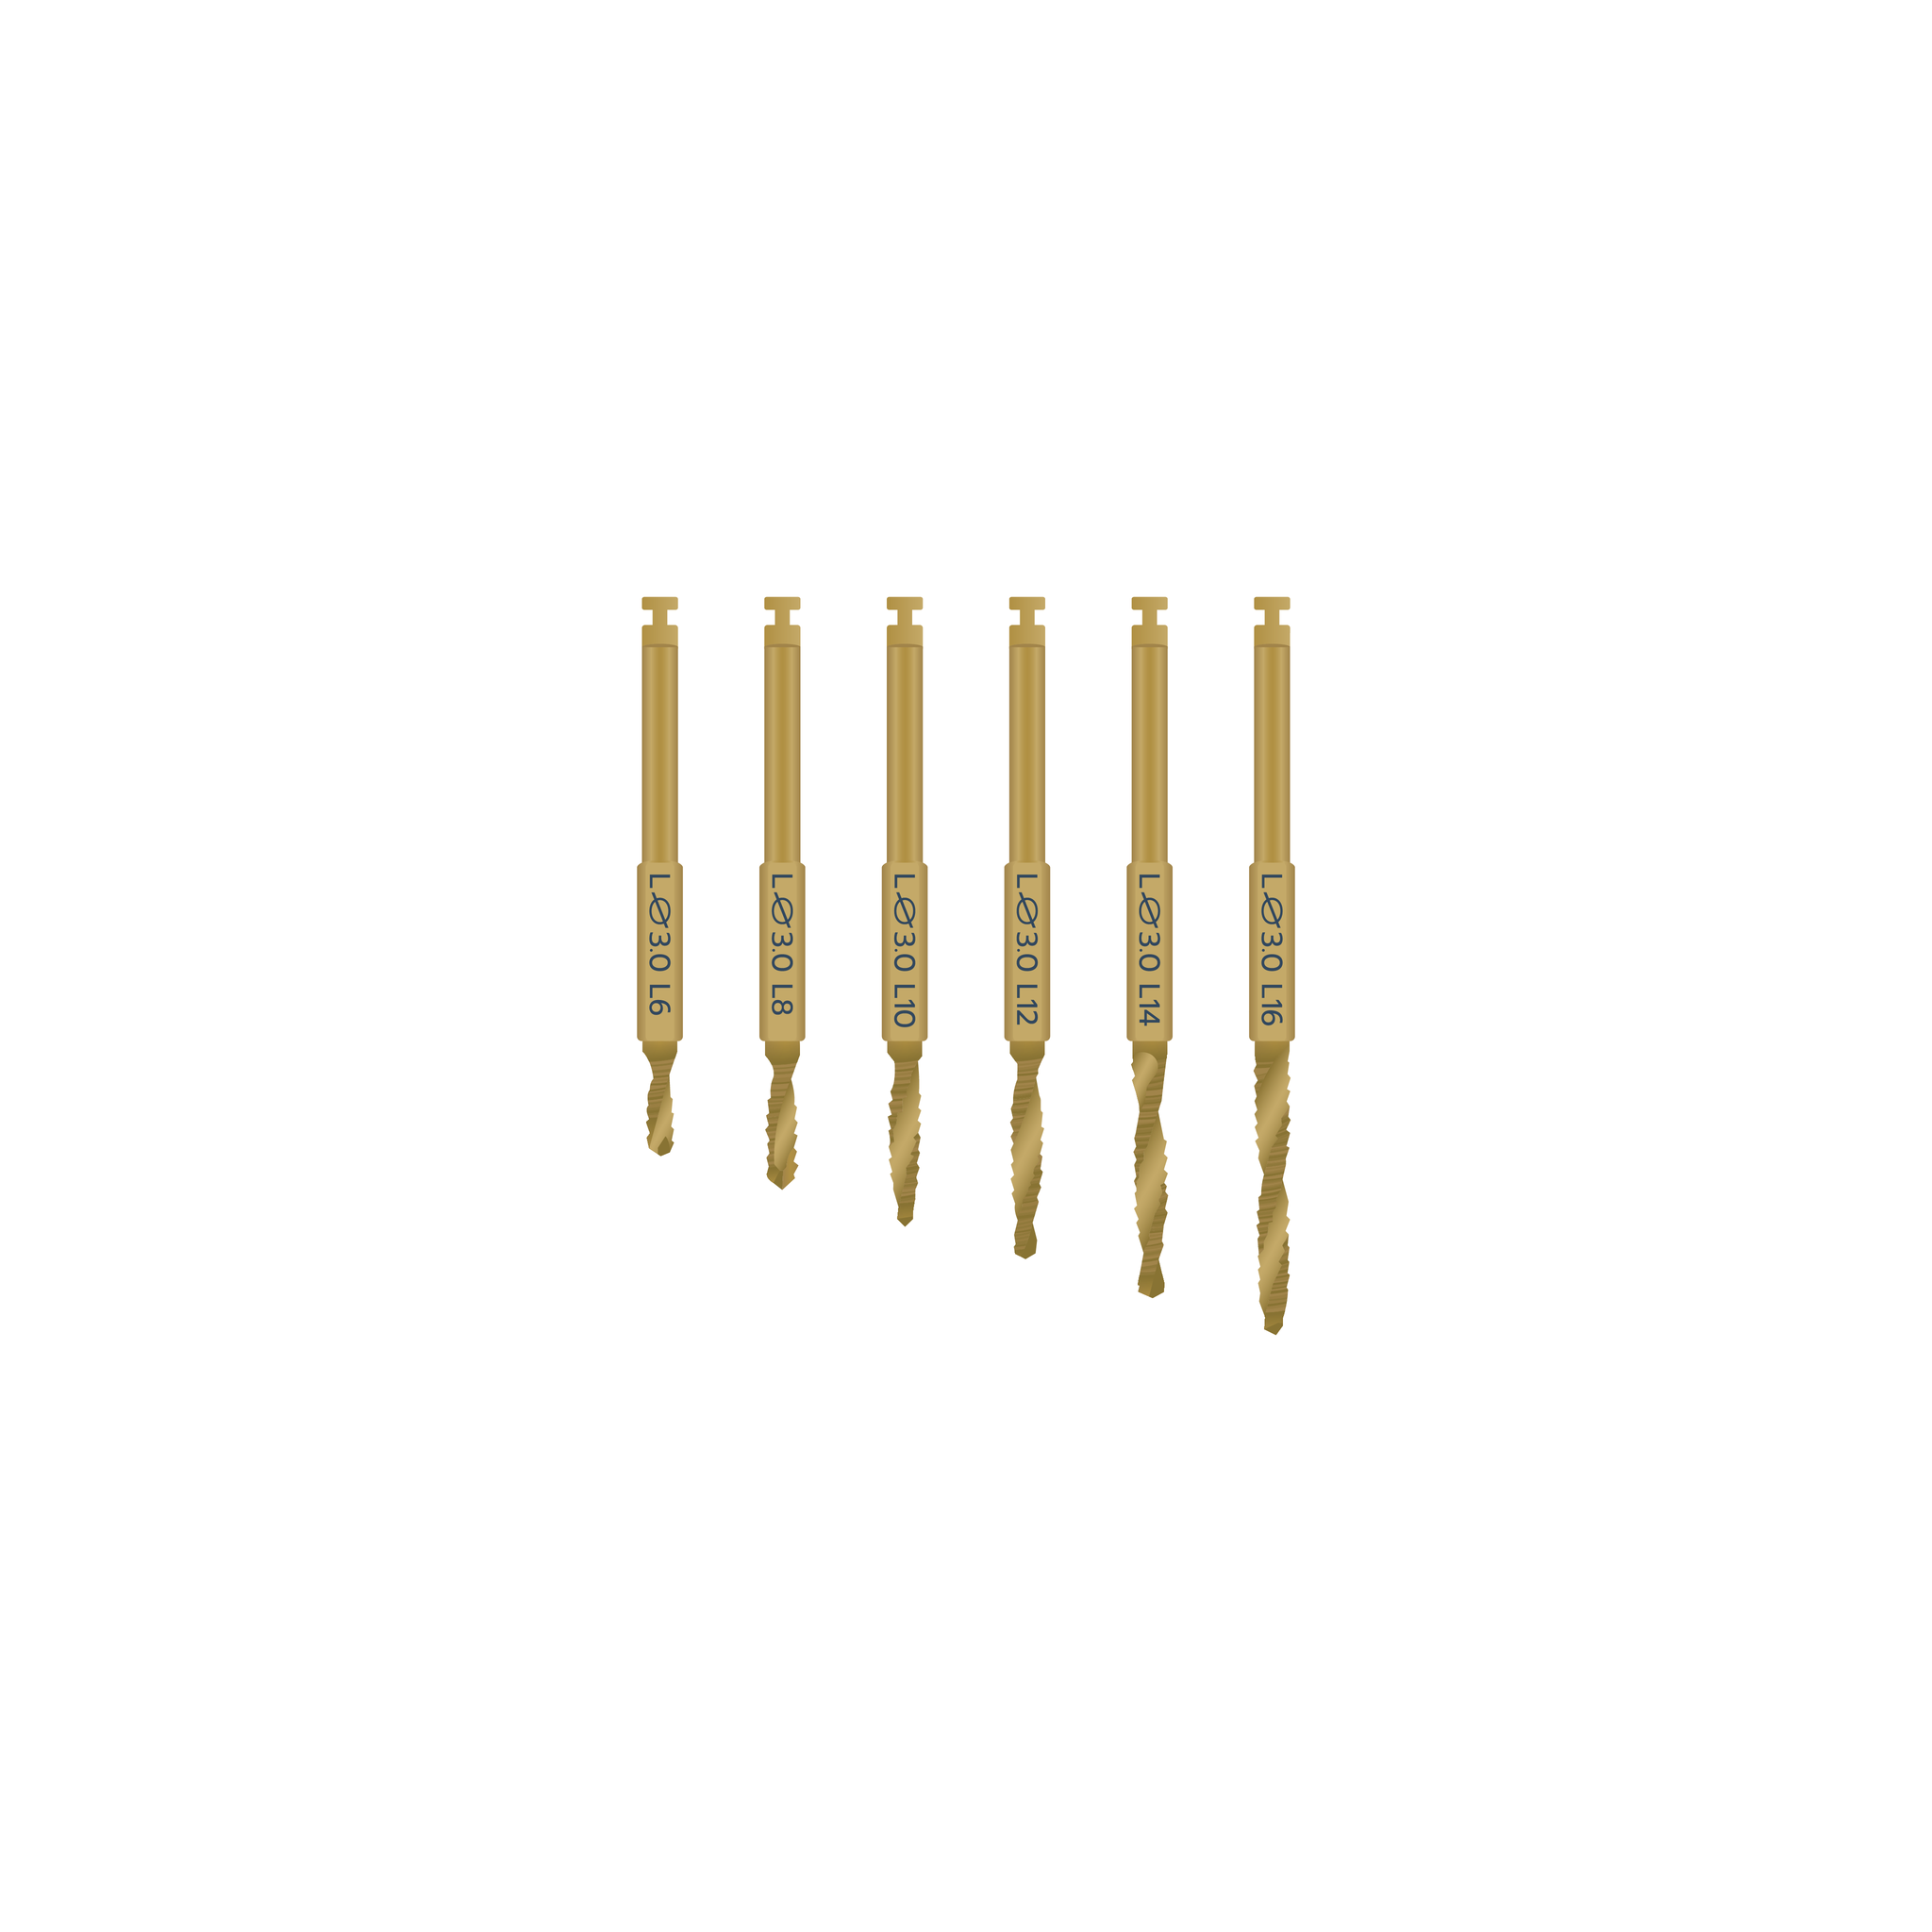 6 gold metal drills from shortest (6 millimeters) to longest (16 millimeters).